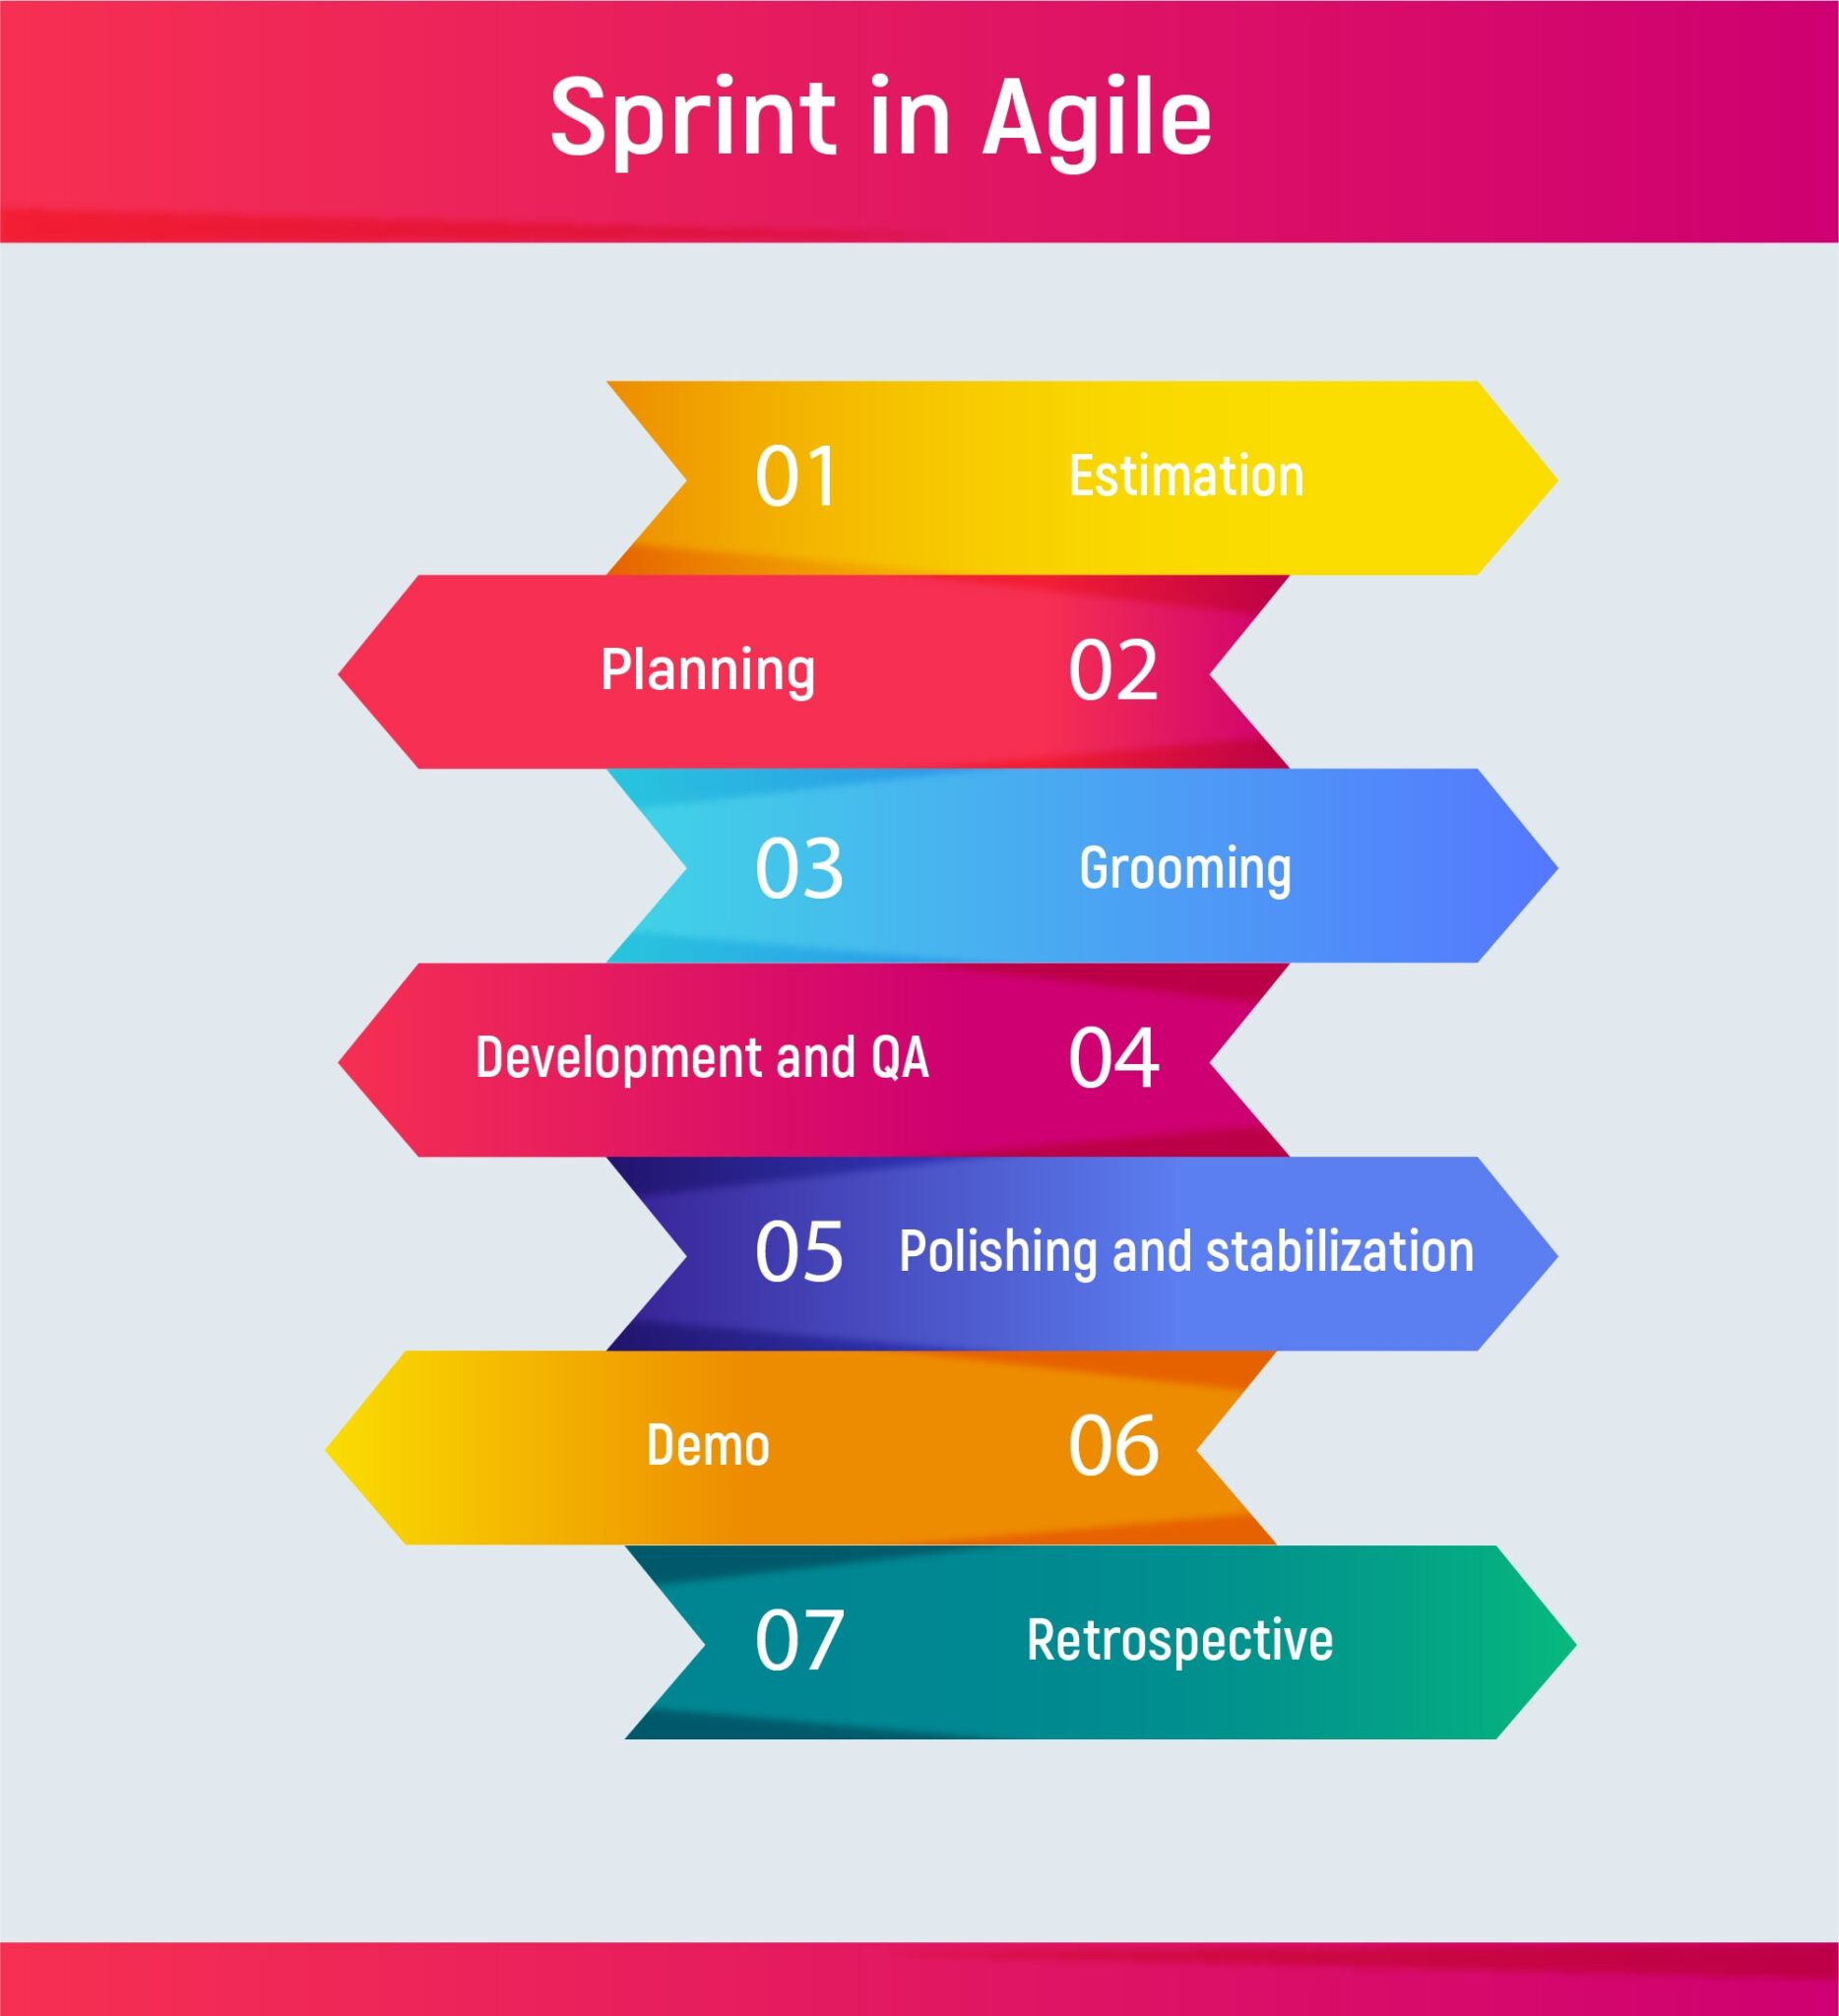 What are sprints in Agile